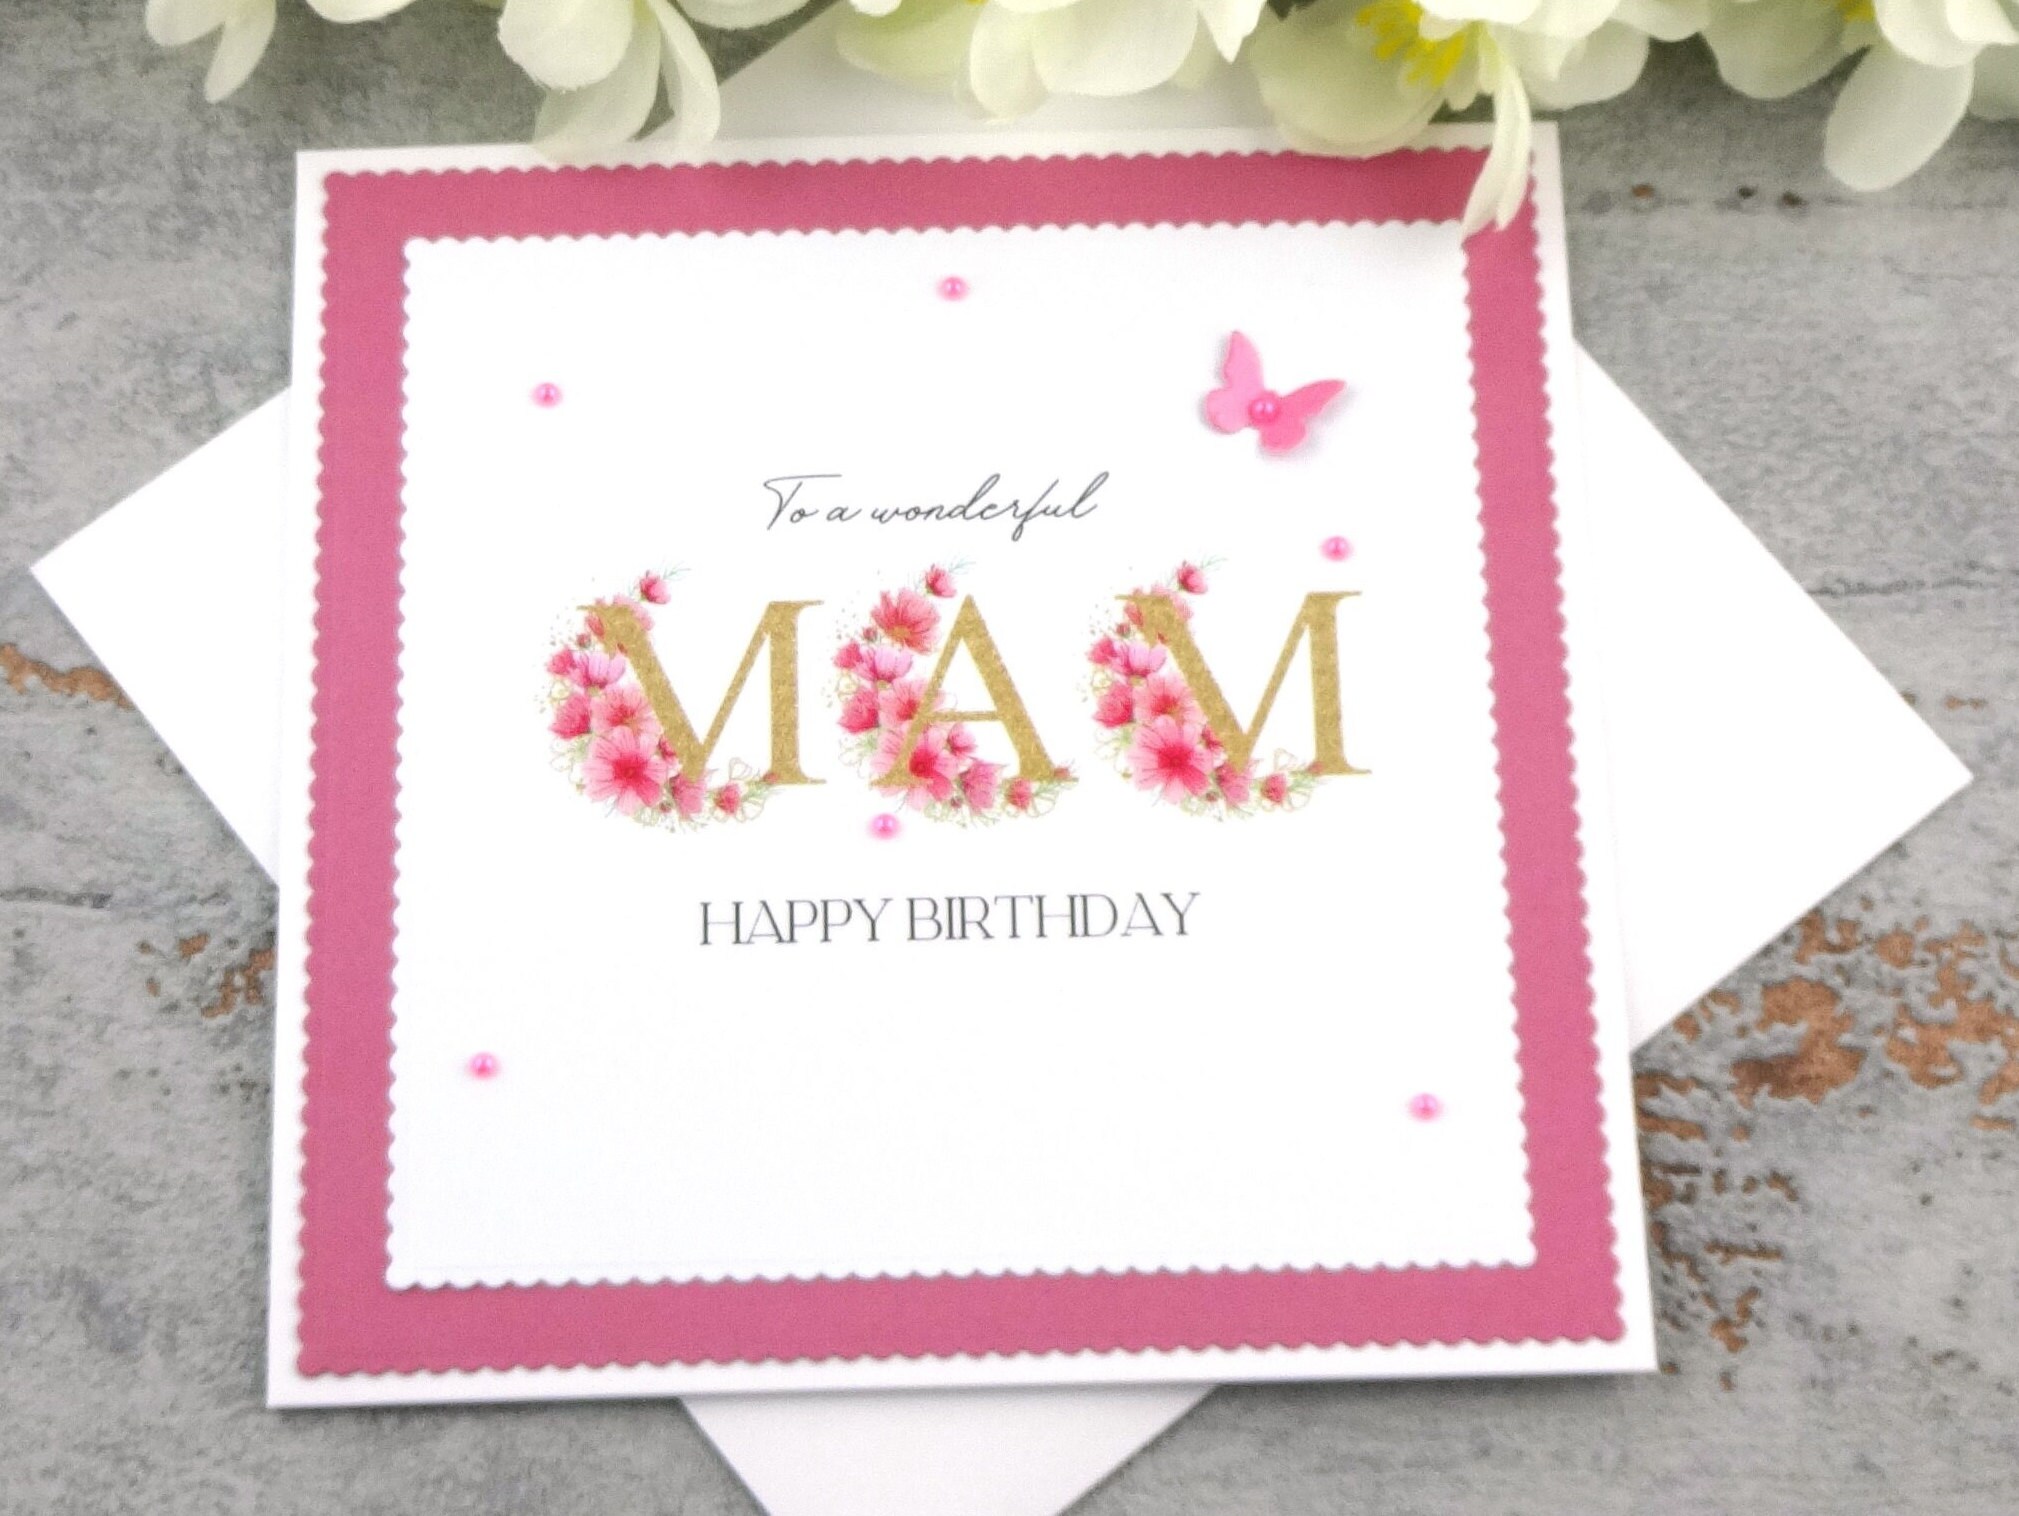 Butterfly Bouquet Birthday Card